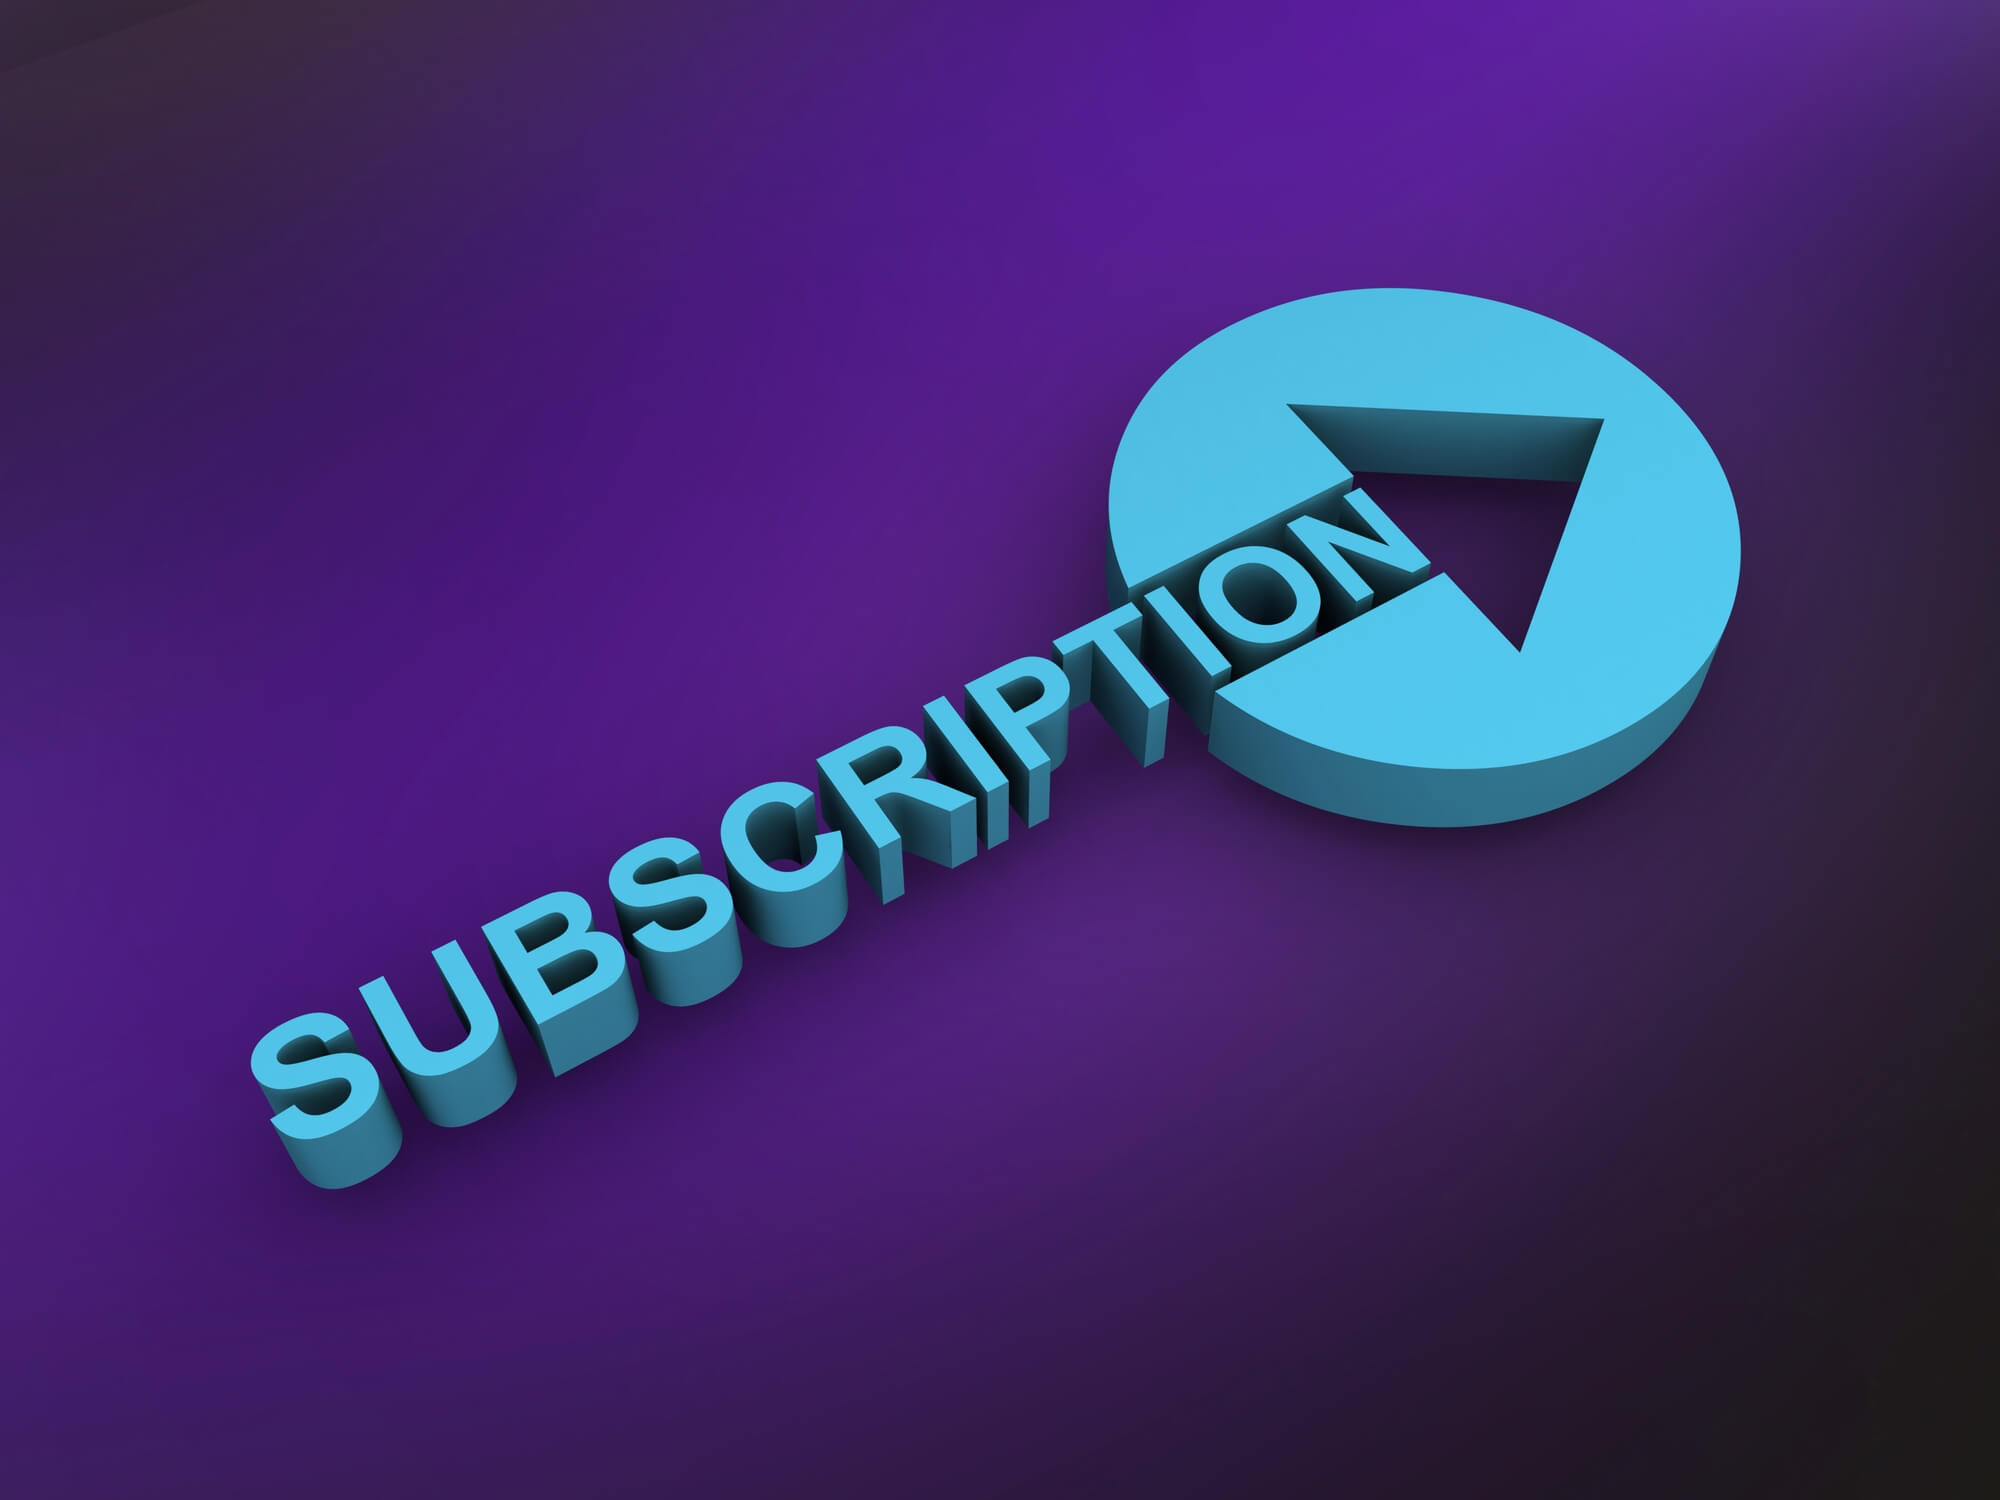 Subscription Billing in the Cloud